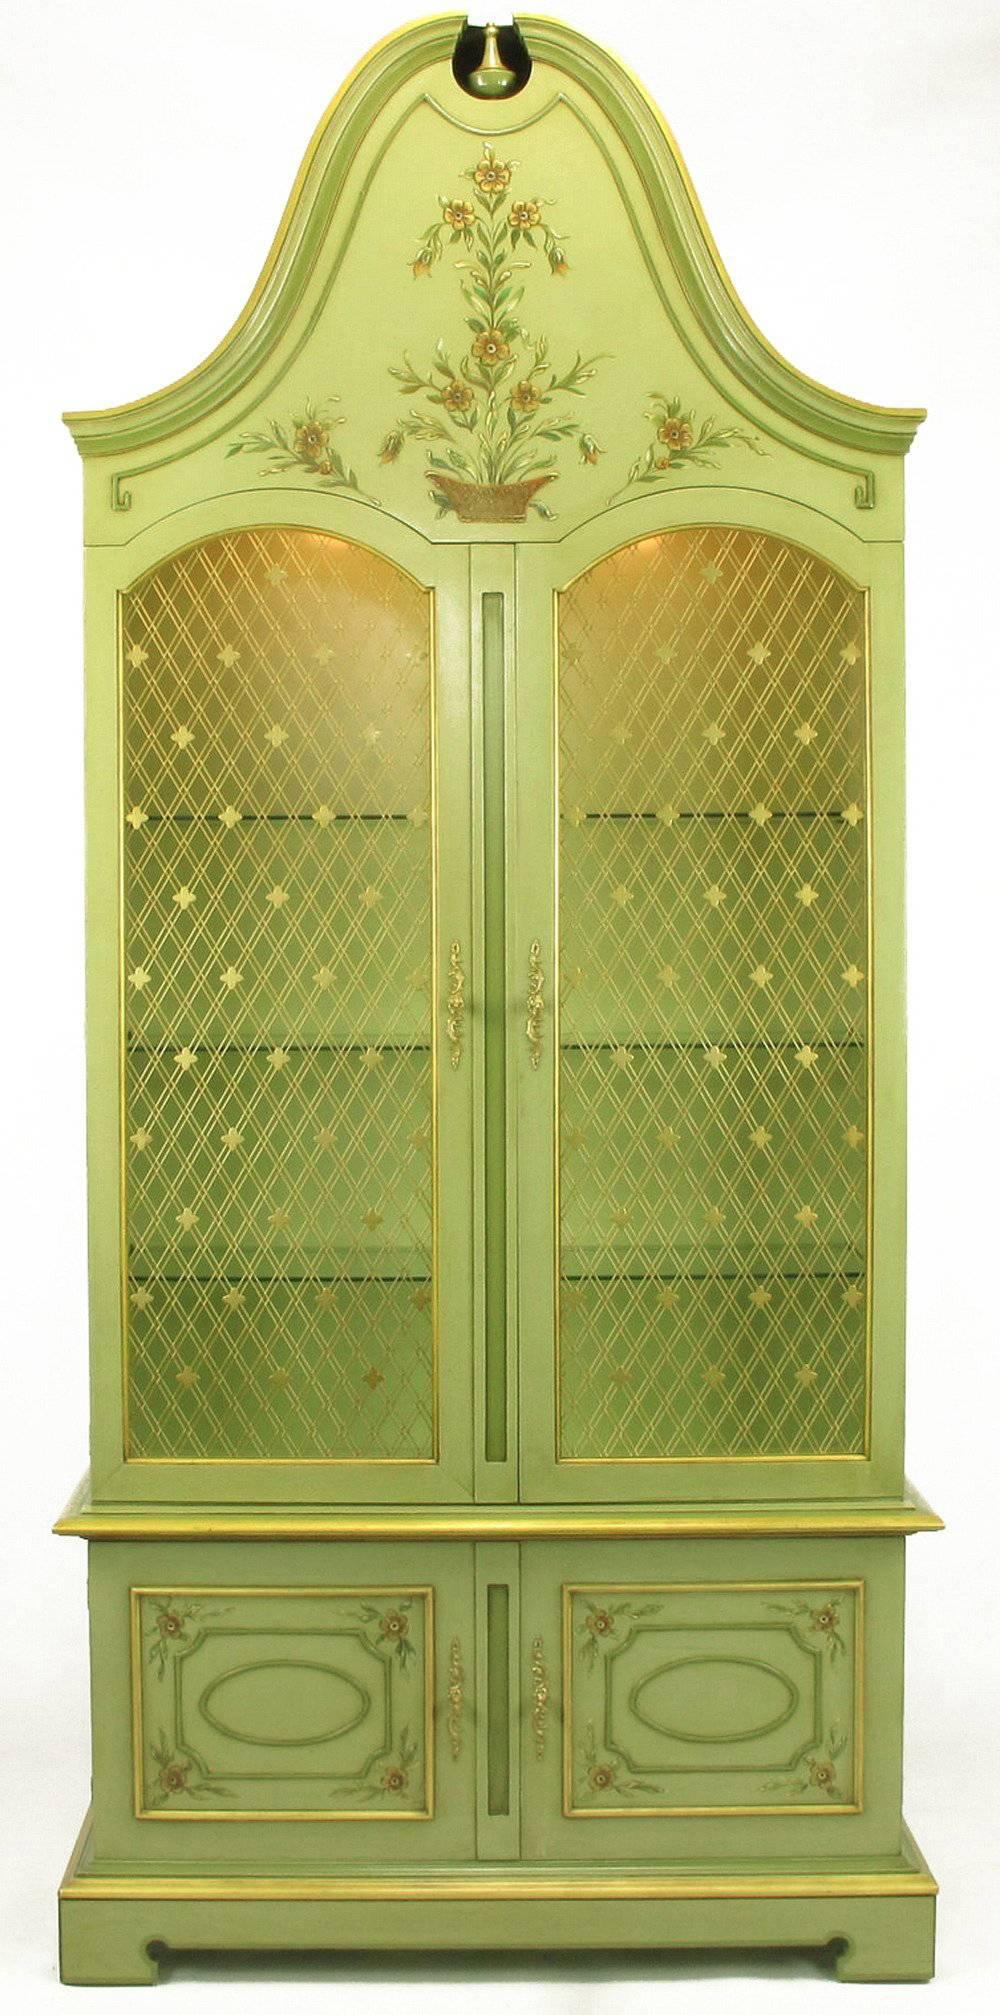 Uncommon John Widdicomb hand-painted French Regency display cabinets in exaggerated fanciful form. Gilt cross hatch wire insert doors with quatrefoil detail. Illuminated interiors, glass shelves and gilt details. Hand-painted floral detailing to